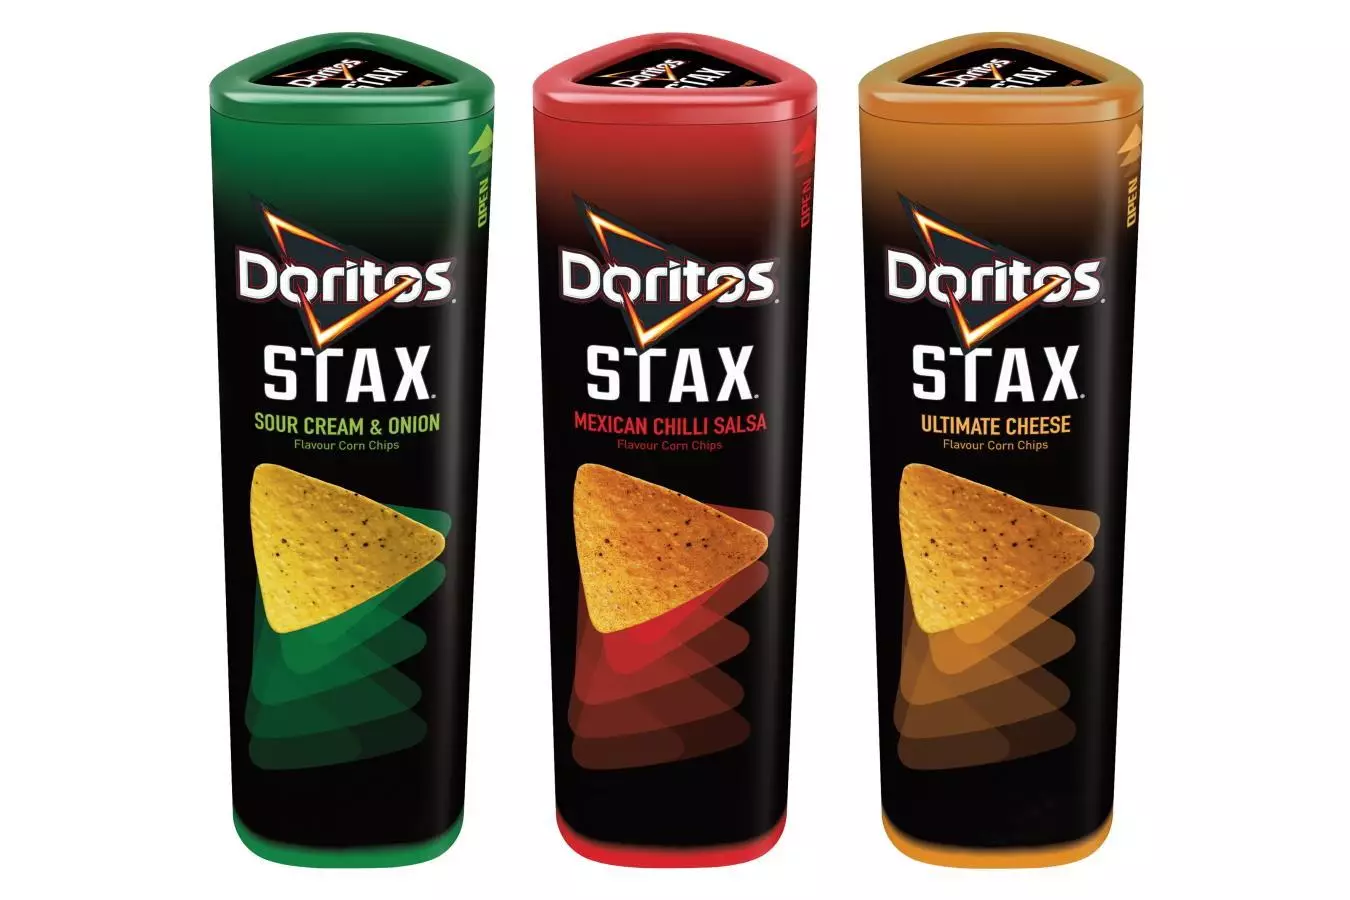 The 170g cans of stackable Doritos come in three mouth-watering sounding flavours and retail for £2.50 each (